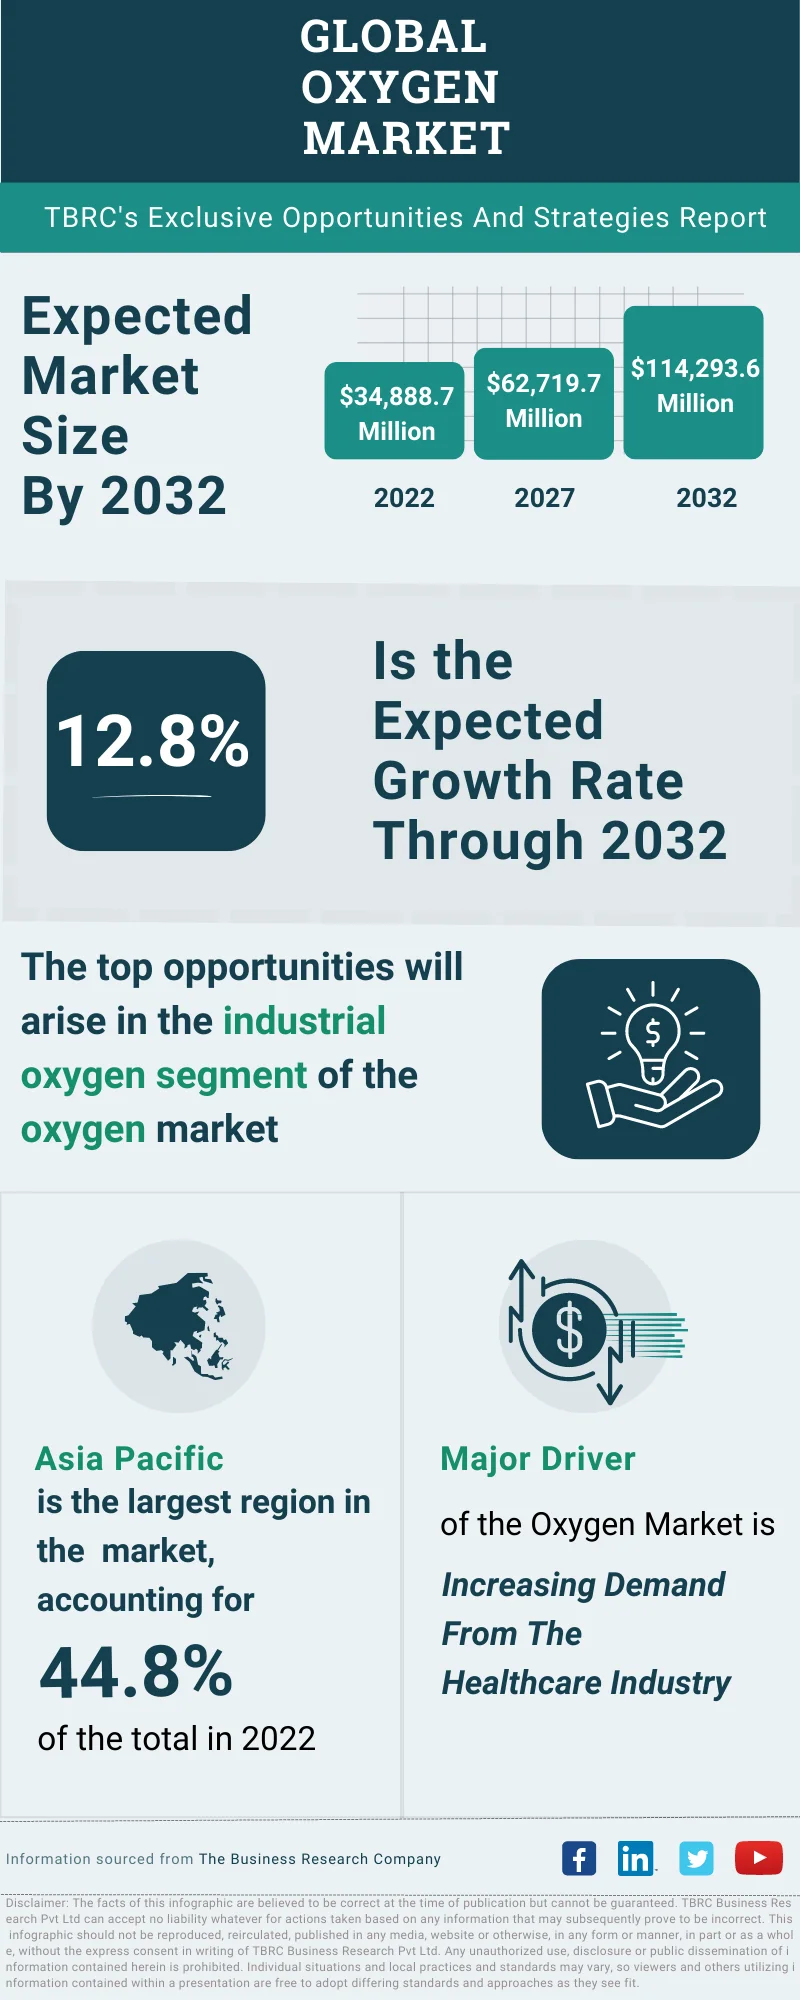 Oxygen Global Market Opportunities And Strategies To 2032